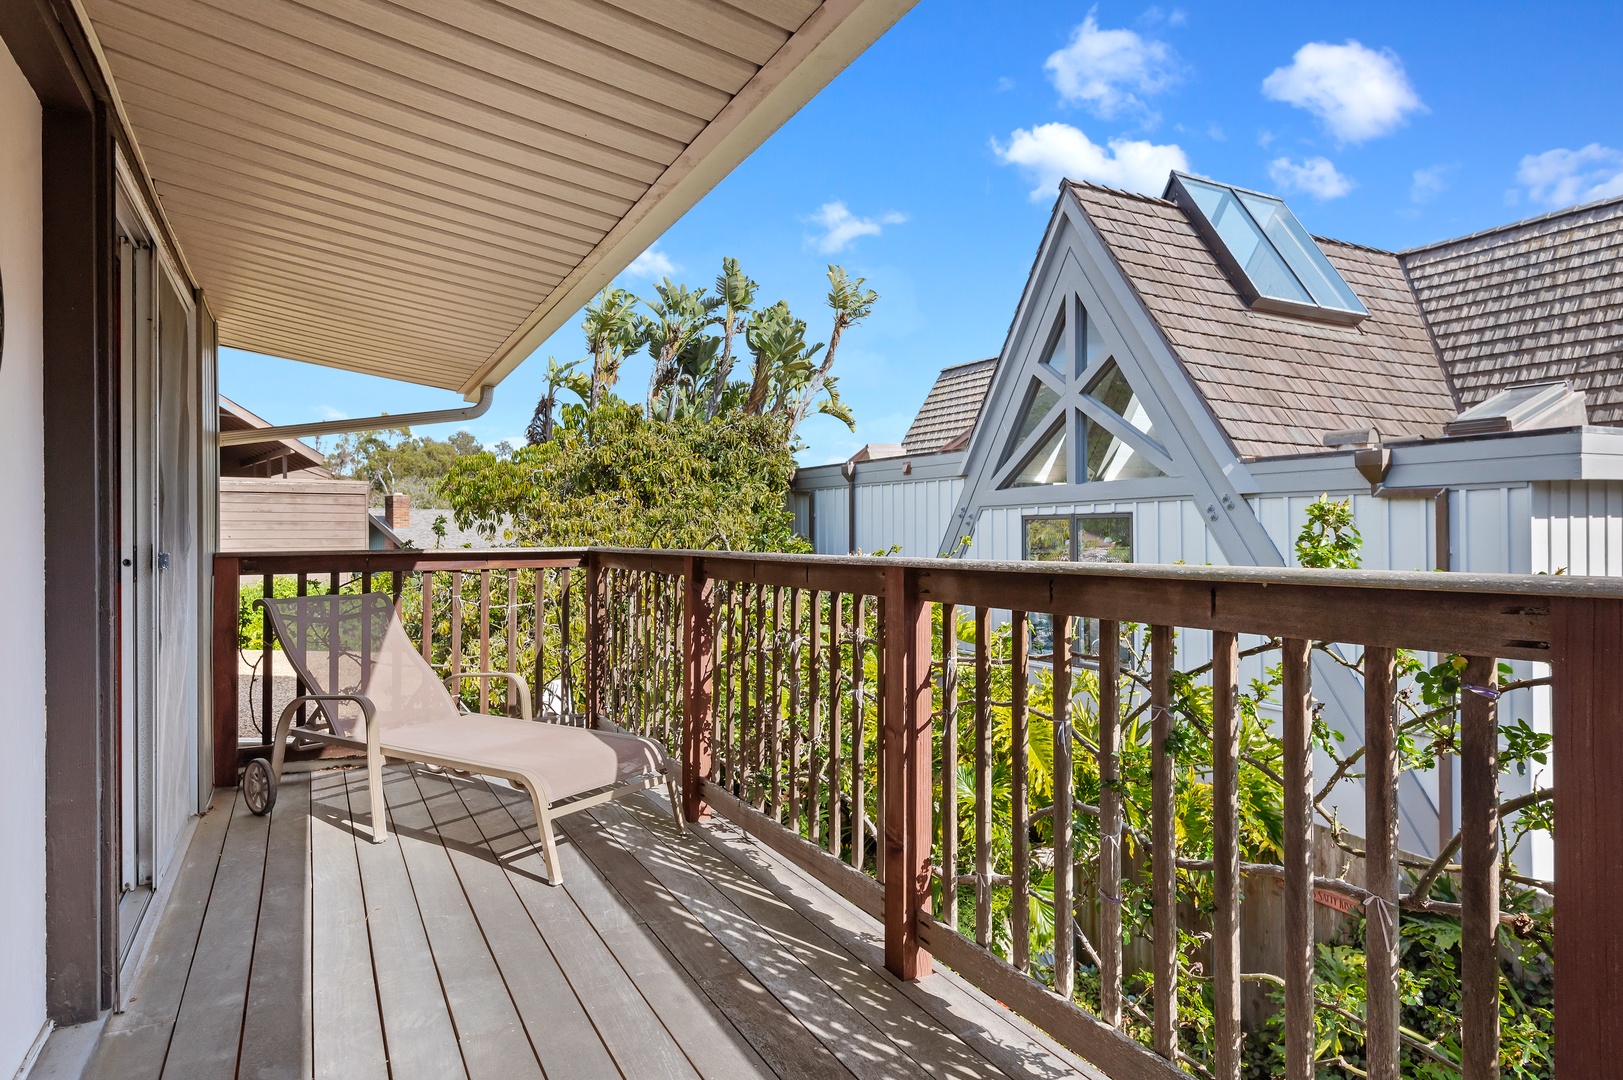 You’ll feel tucked away from it all on this secluded Deck, with outdoor lounge space and Table for 2